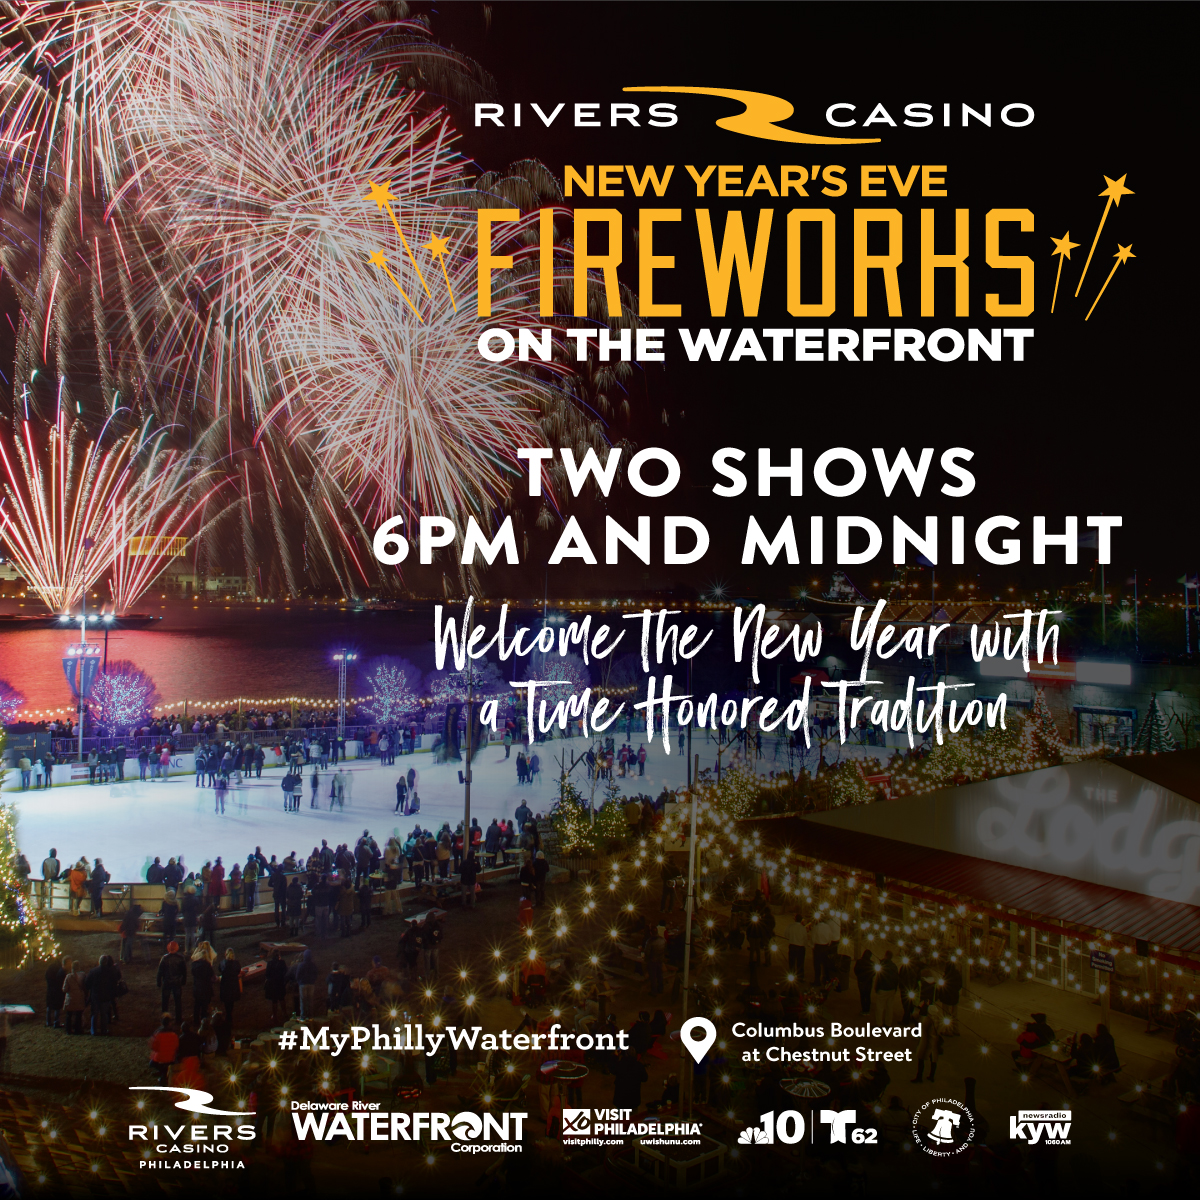 Rivers Casino New Year's Eve Fireworks on the Waterfront » Cherry